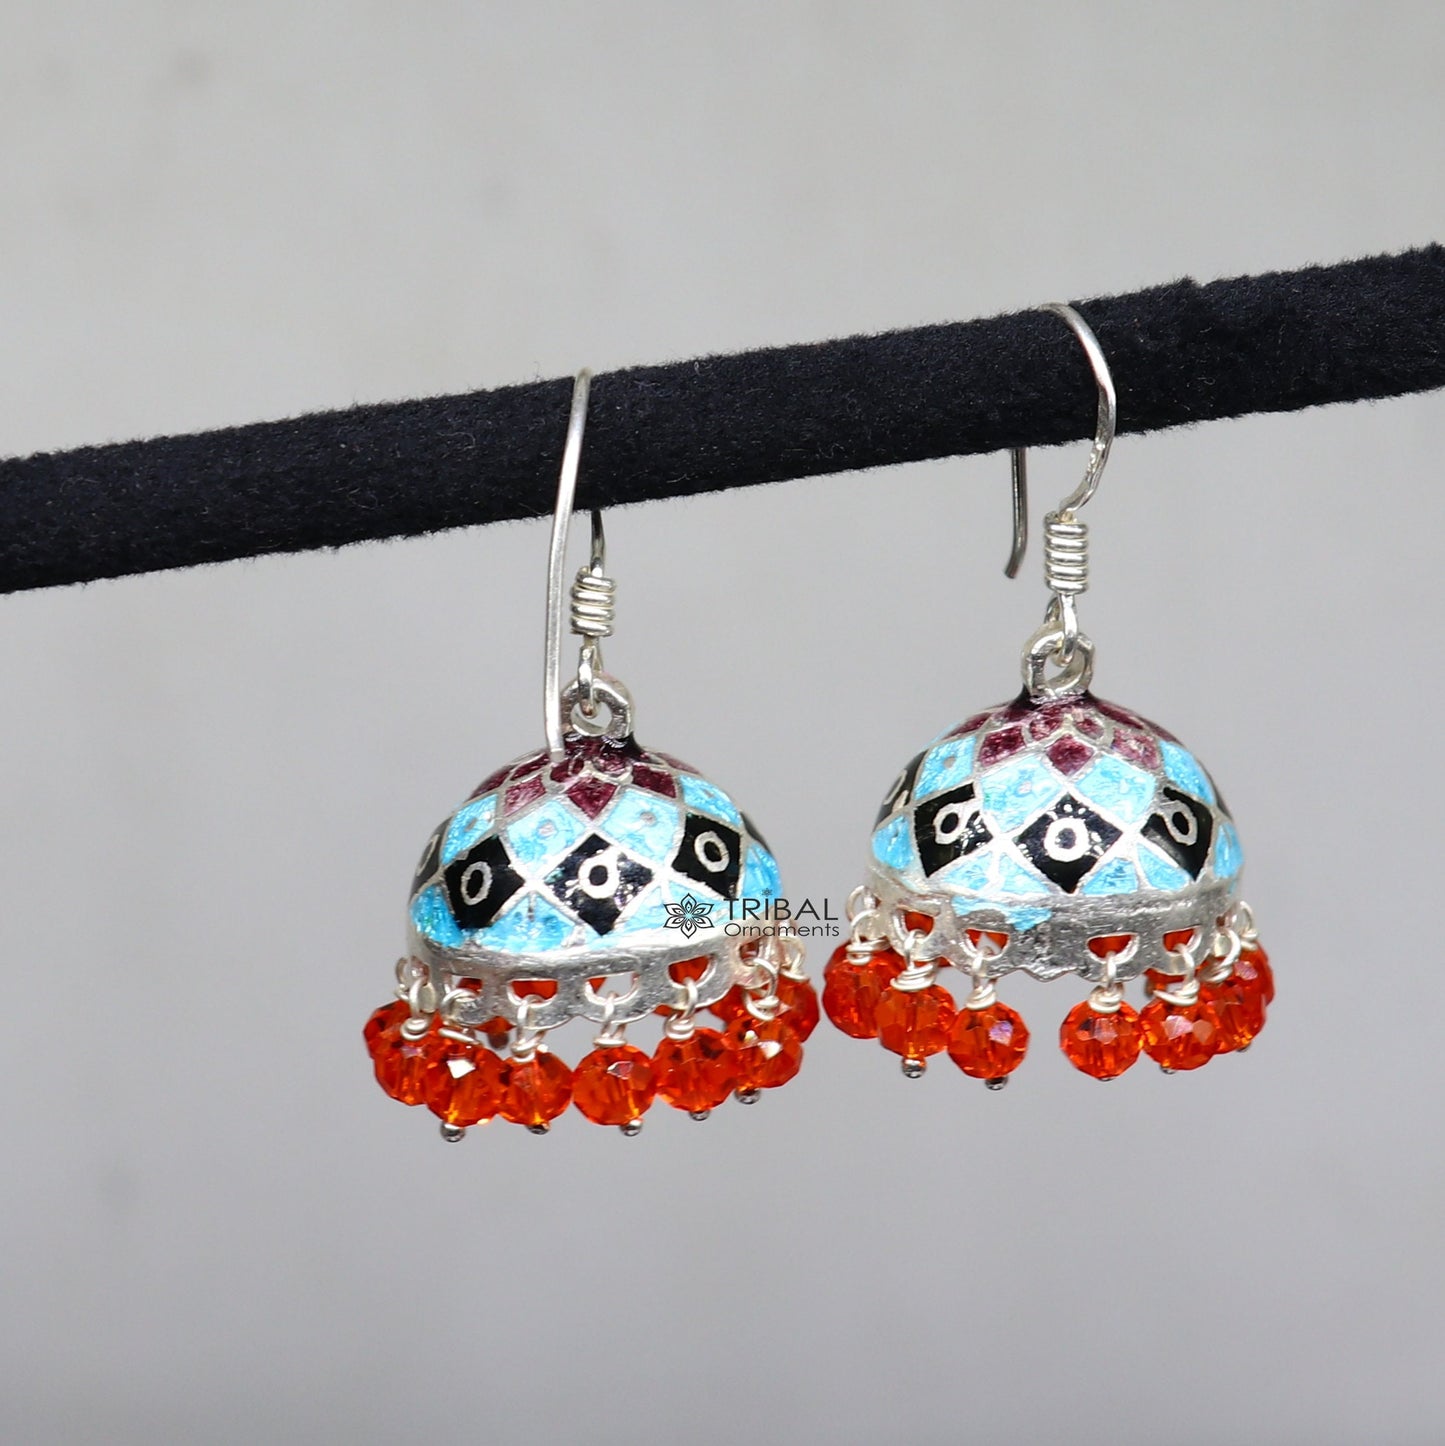 Traditional cultural 925 sterling silver Stylish colorful hoops earring chandelier, enamel work jhumka hanging drops brides earrings  s1185 - TRIBAL ORNAMENTS